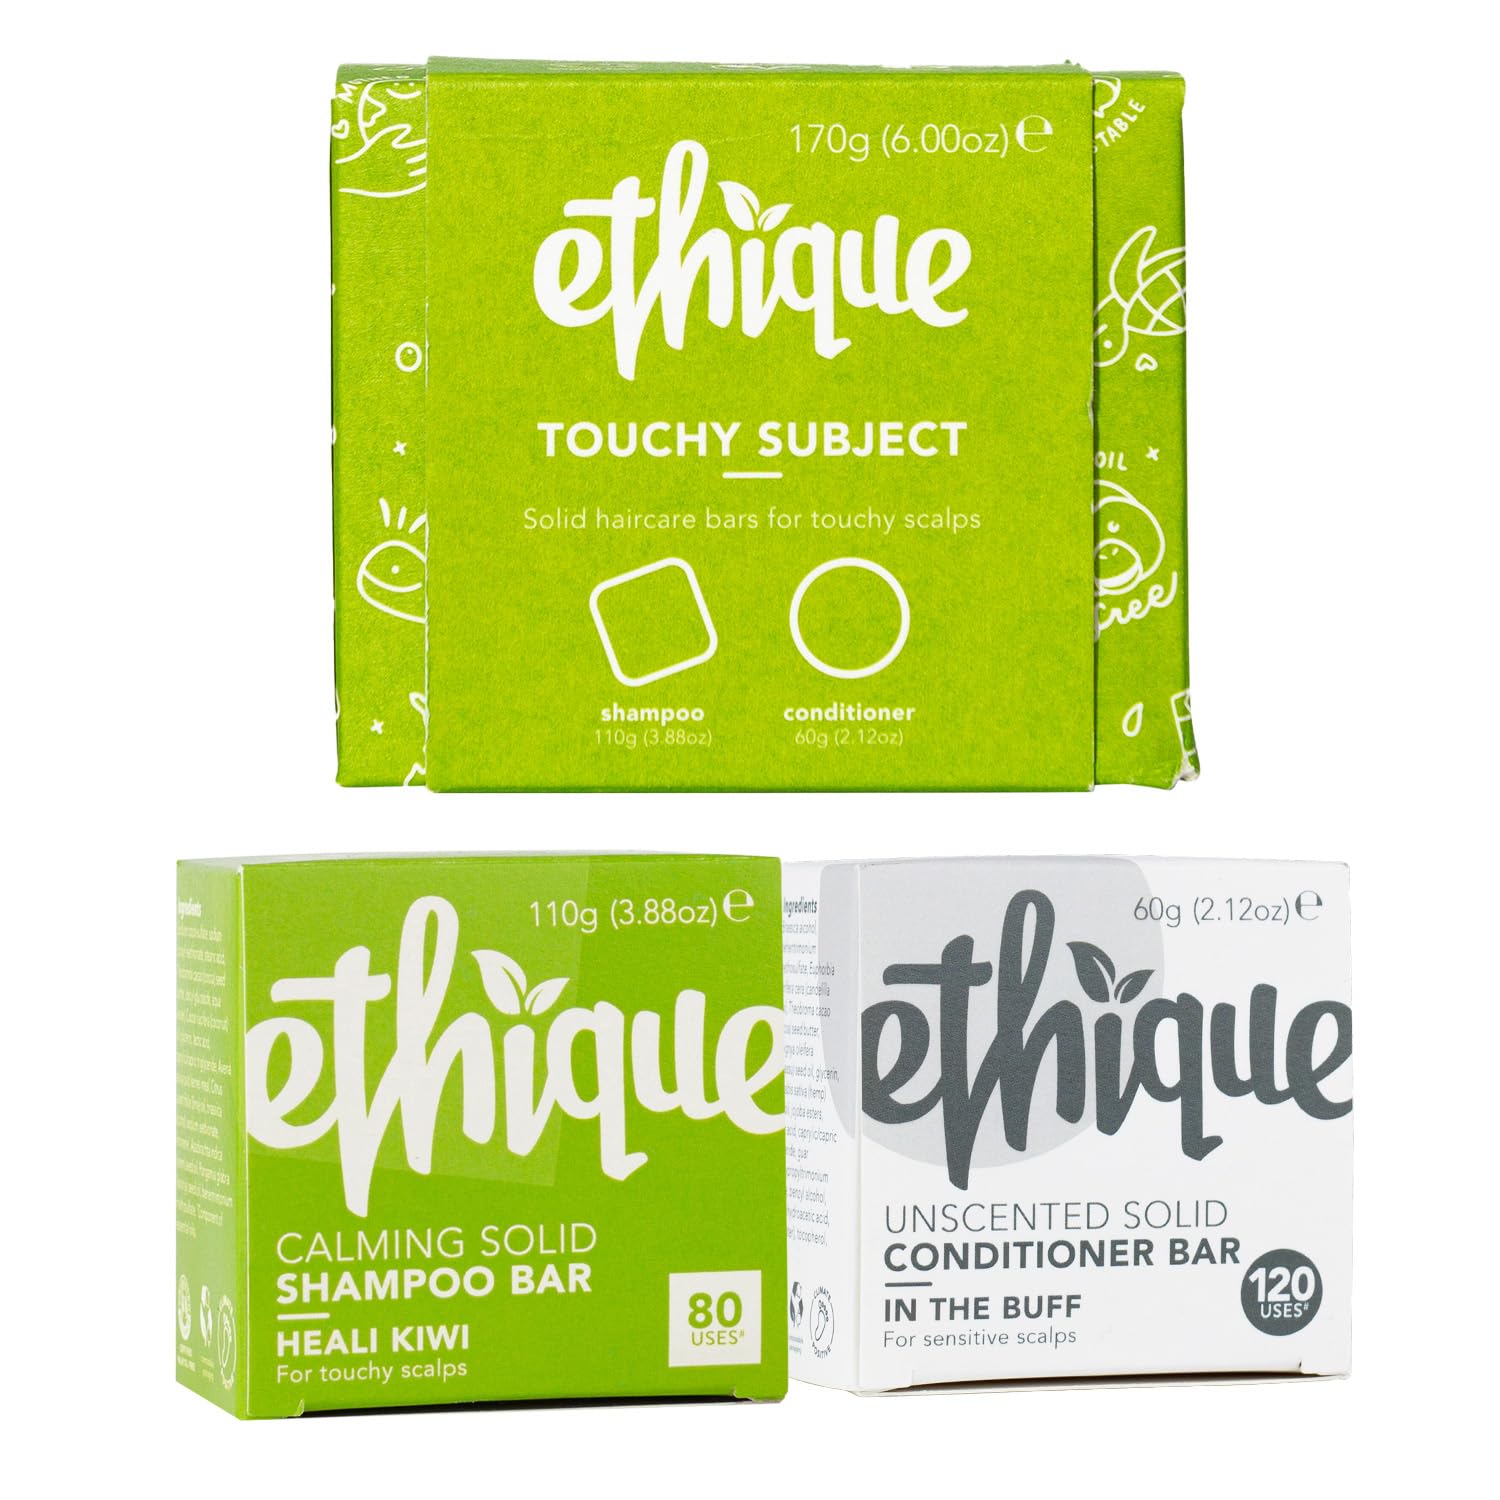 Ethique Touchy Scalps Giftpack- Dandruff Shampoo Bar & Conditioner Bar Set for Dry, Flakey & Itchy Scalps -Vegan, Eco-Friendly, Plastic-Free, Cruelty-Free, 6 oz (Set of 2) : Beauty & Personal Care